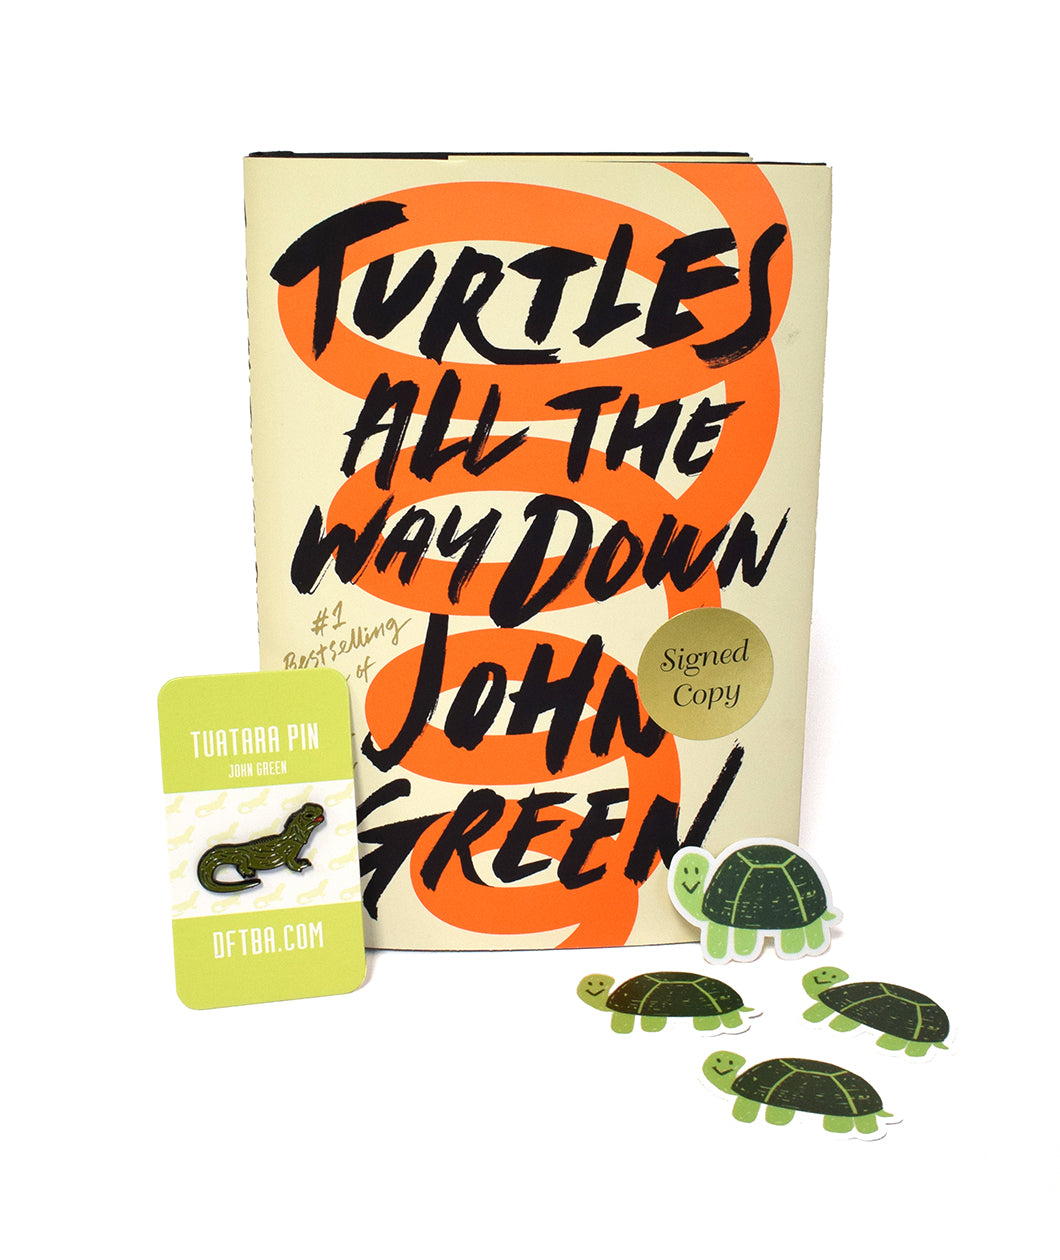 Book with orange spiral stretching height of cover on a cream background and black text that says “Turtles All the Way Down John Green.” A pin green tuatara pin leans against book. There are four green cartoon drawings of turtles with smiles - from John Green